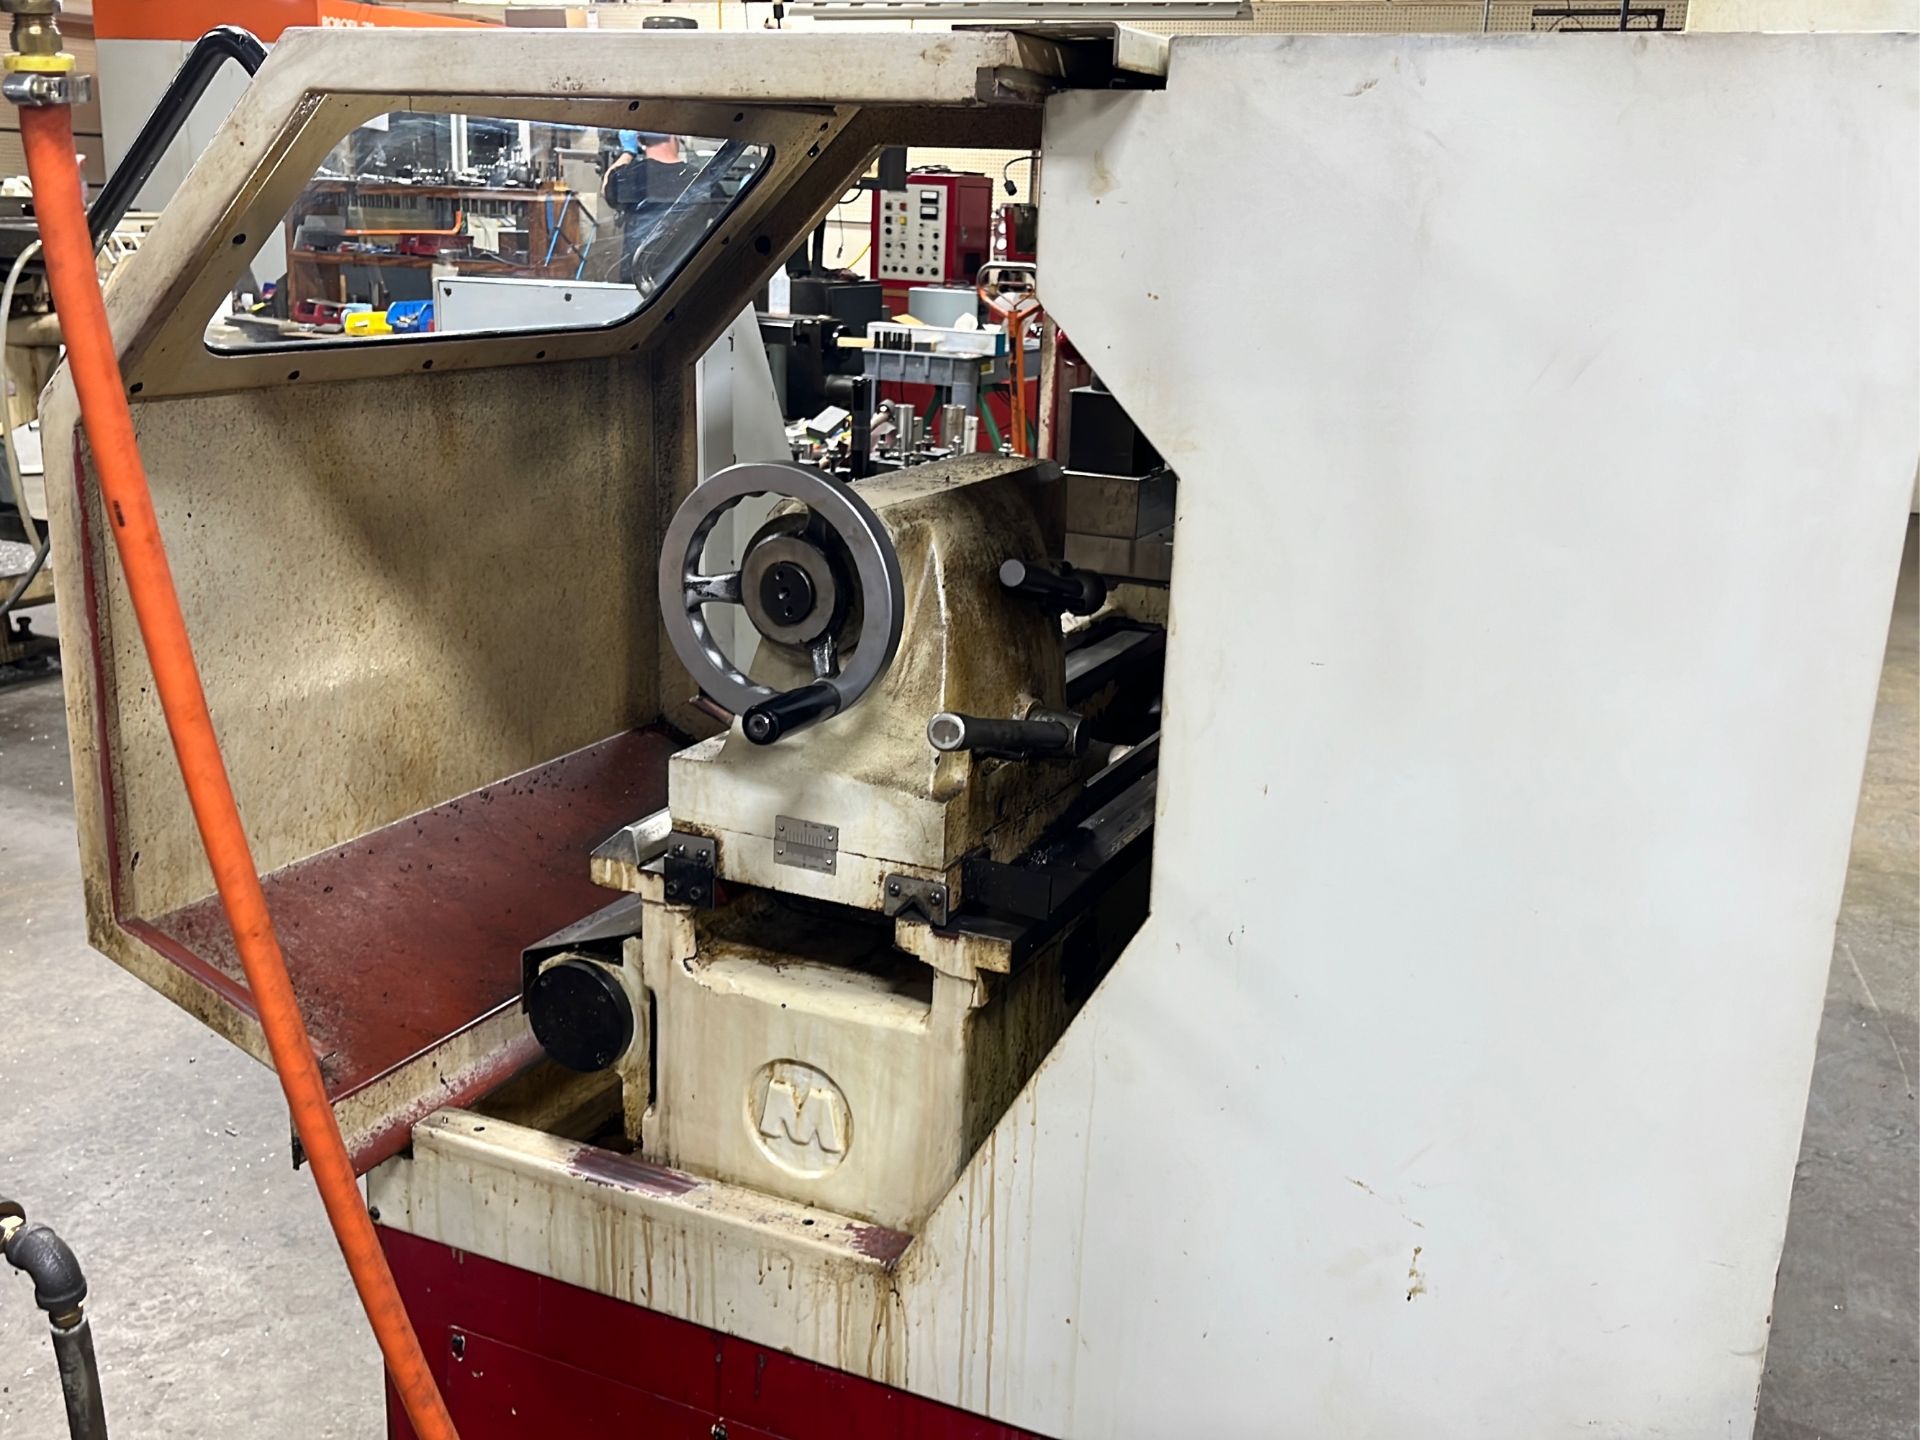 Fryer model ET-18 CNC lathe serial number 18086 - A $700 Rigging fee will be added to the winning in - Image 8 of 11